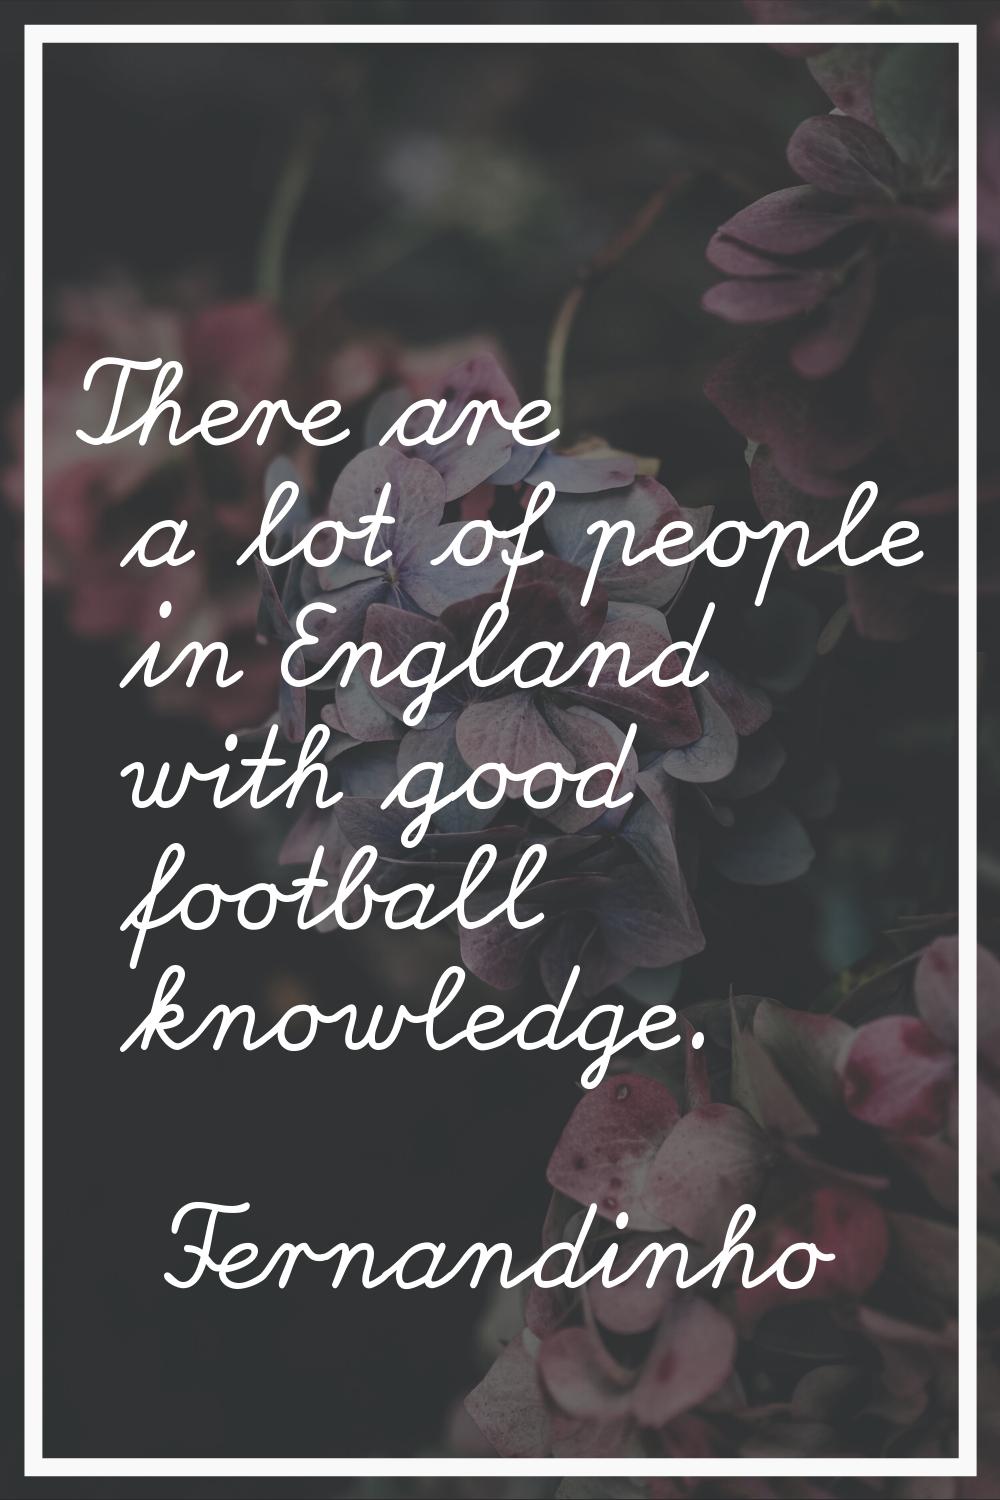 There are a lot of people in England with good football knowledge.